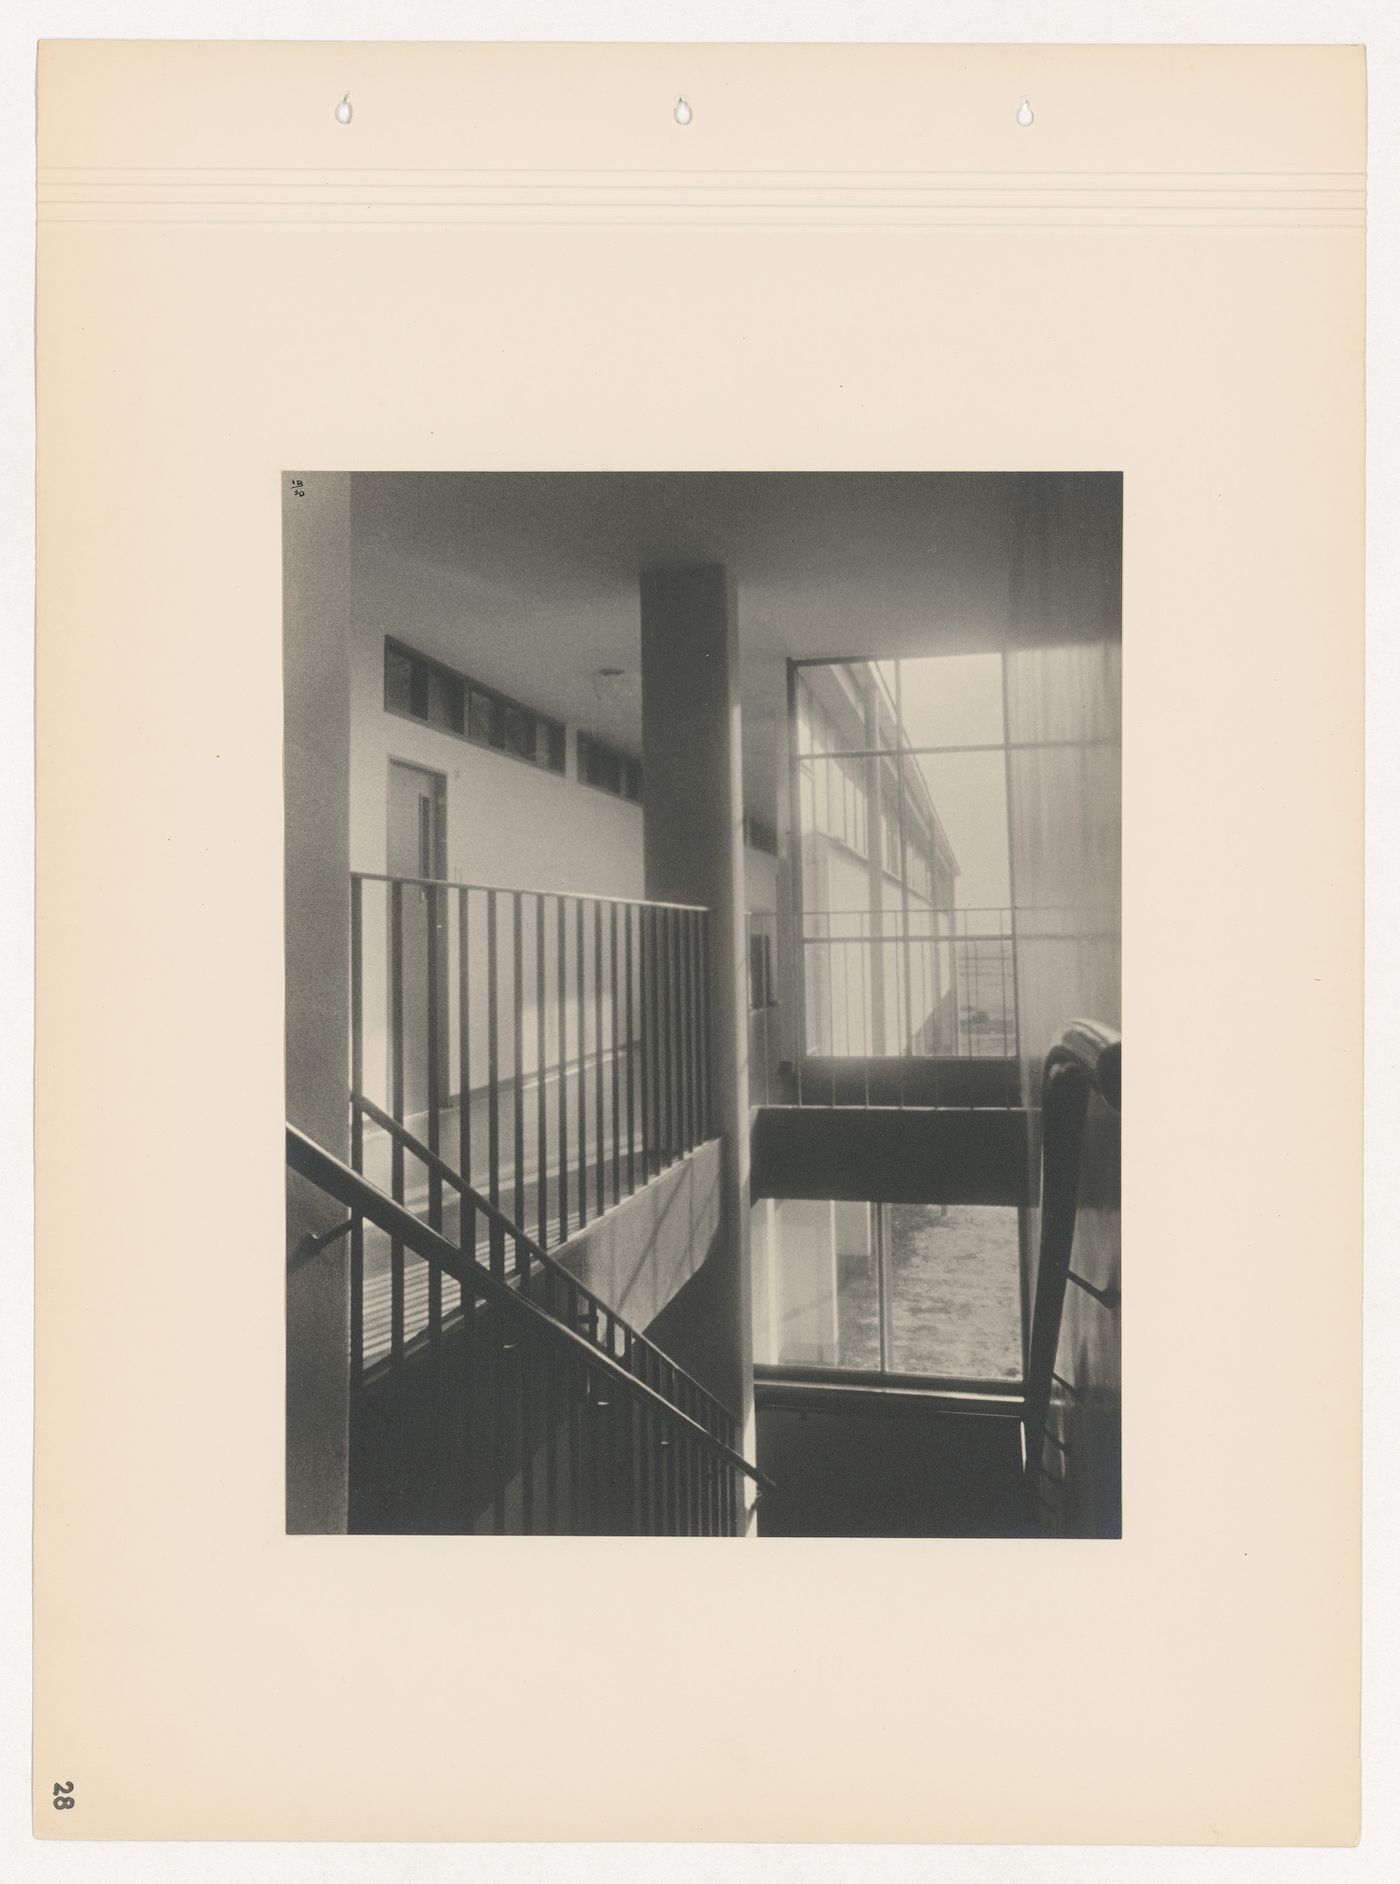 Interior view of a stairwell in the south wing of the Budge Foundation Old People's Home, Frankfurt am Main, Germany